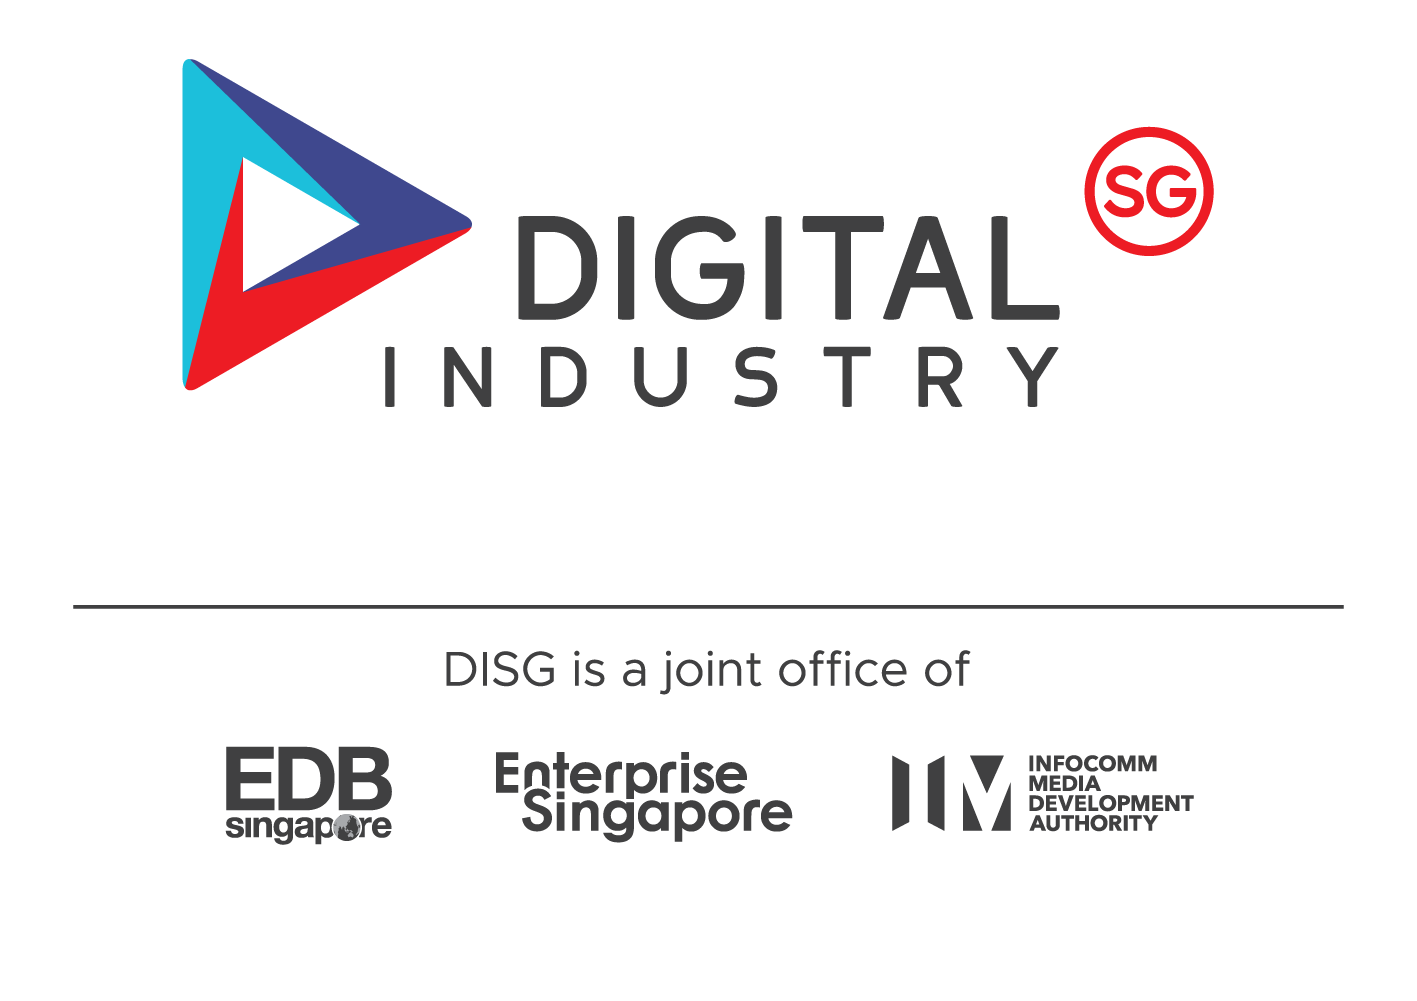 The Digital Industry Singapore (DISG) logo with other partners like EDB, ESG, and IMDA